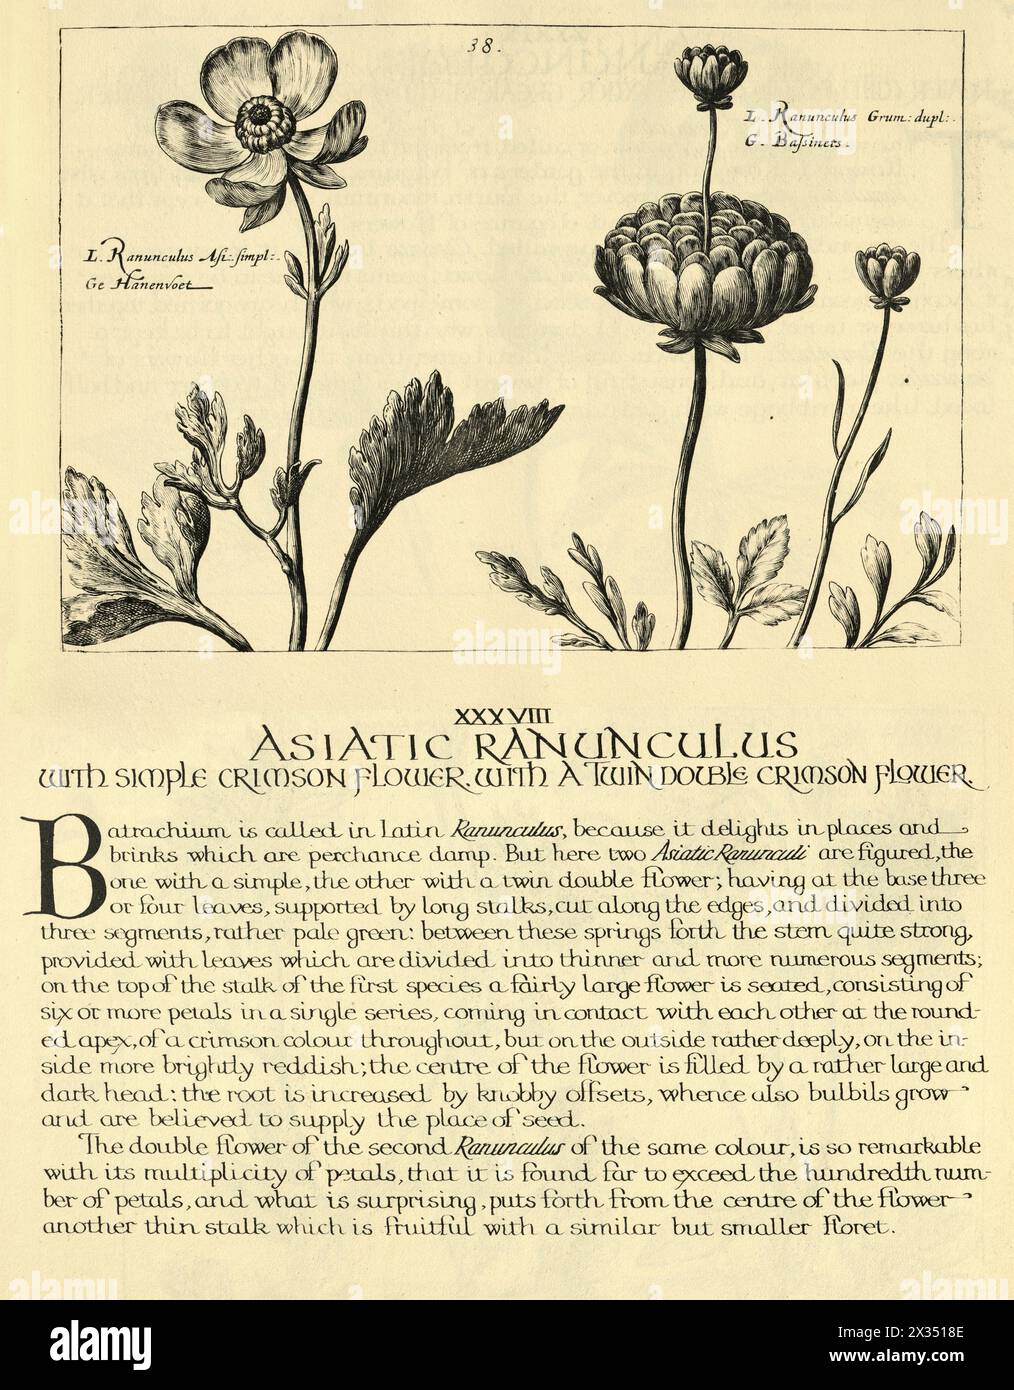 Botanical art print of Asiatic Ranunculus, Persian buttercup, herbaceous perennial flowering plant, from Hortus Floridus by Crispin de Passe, Vintage illustration, 17th Century Stock Photo